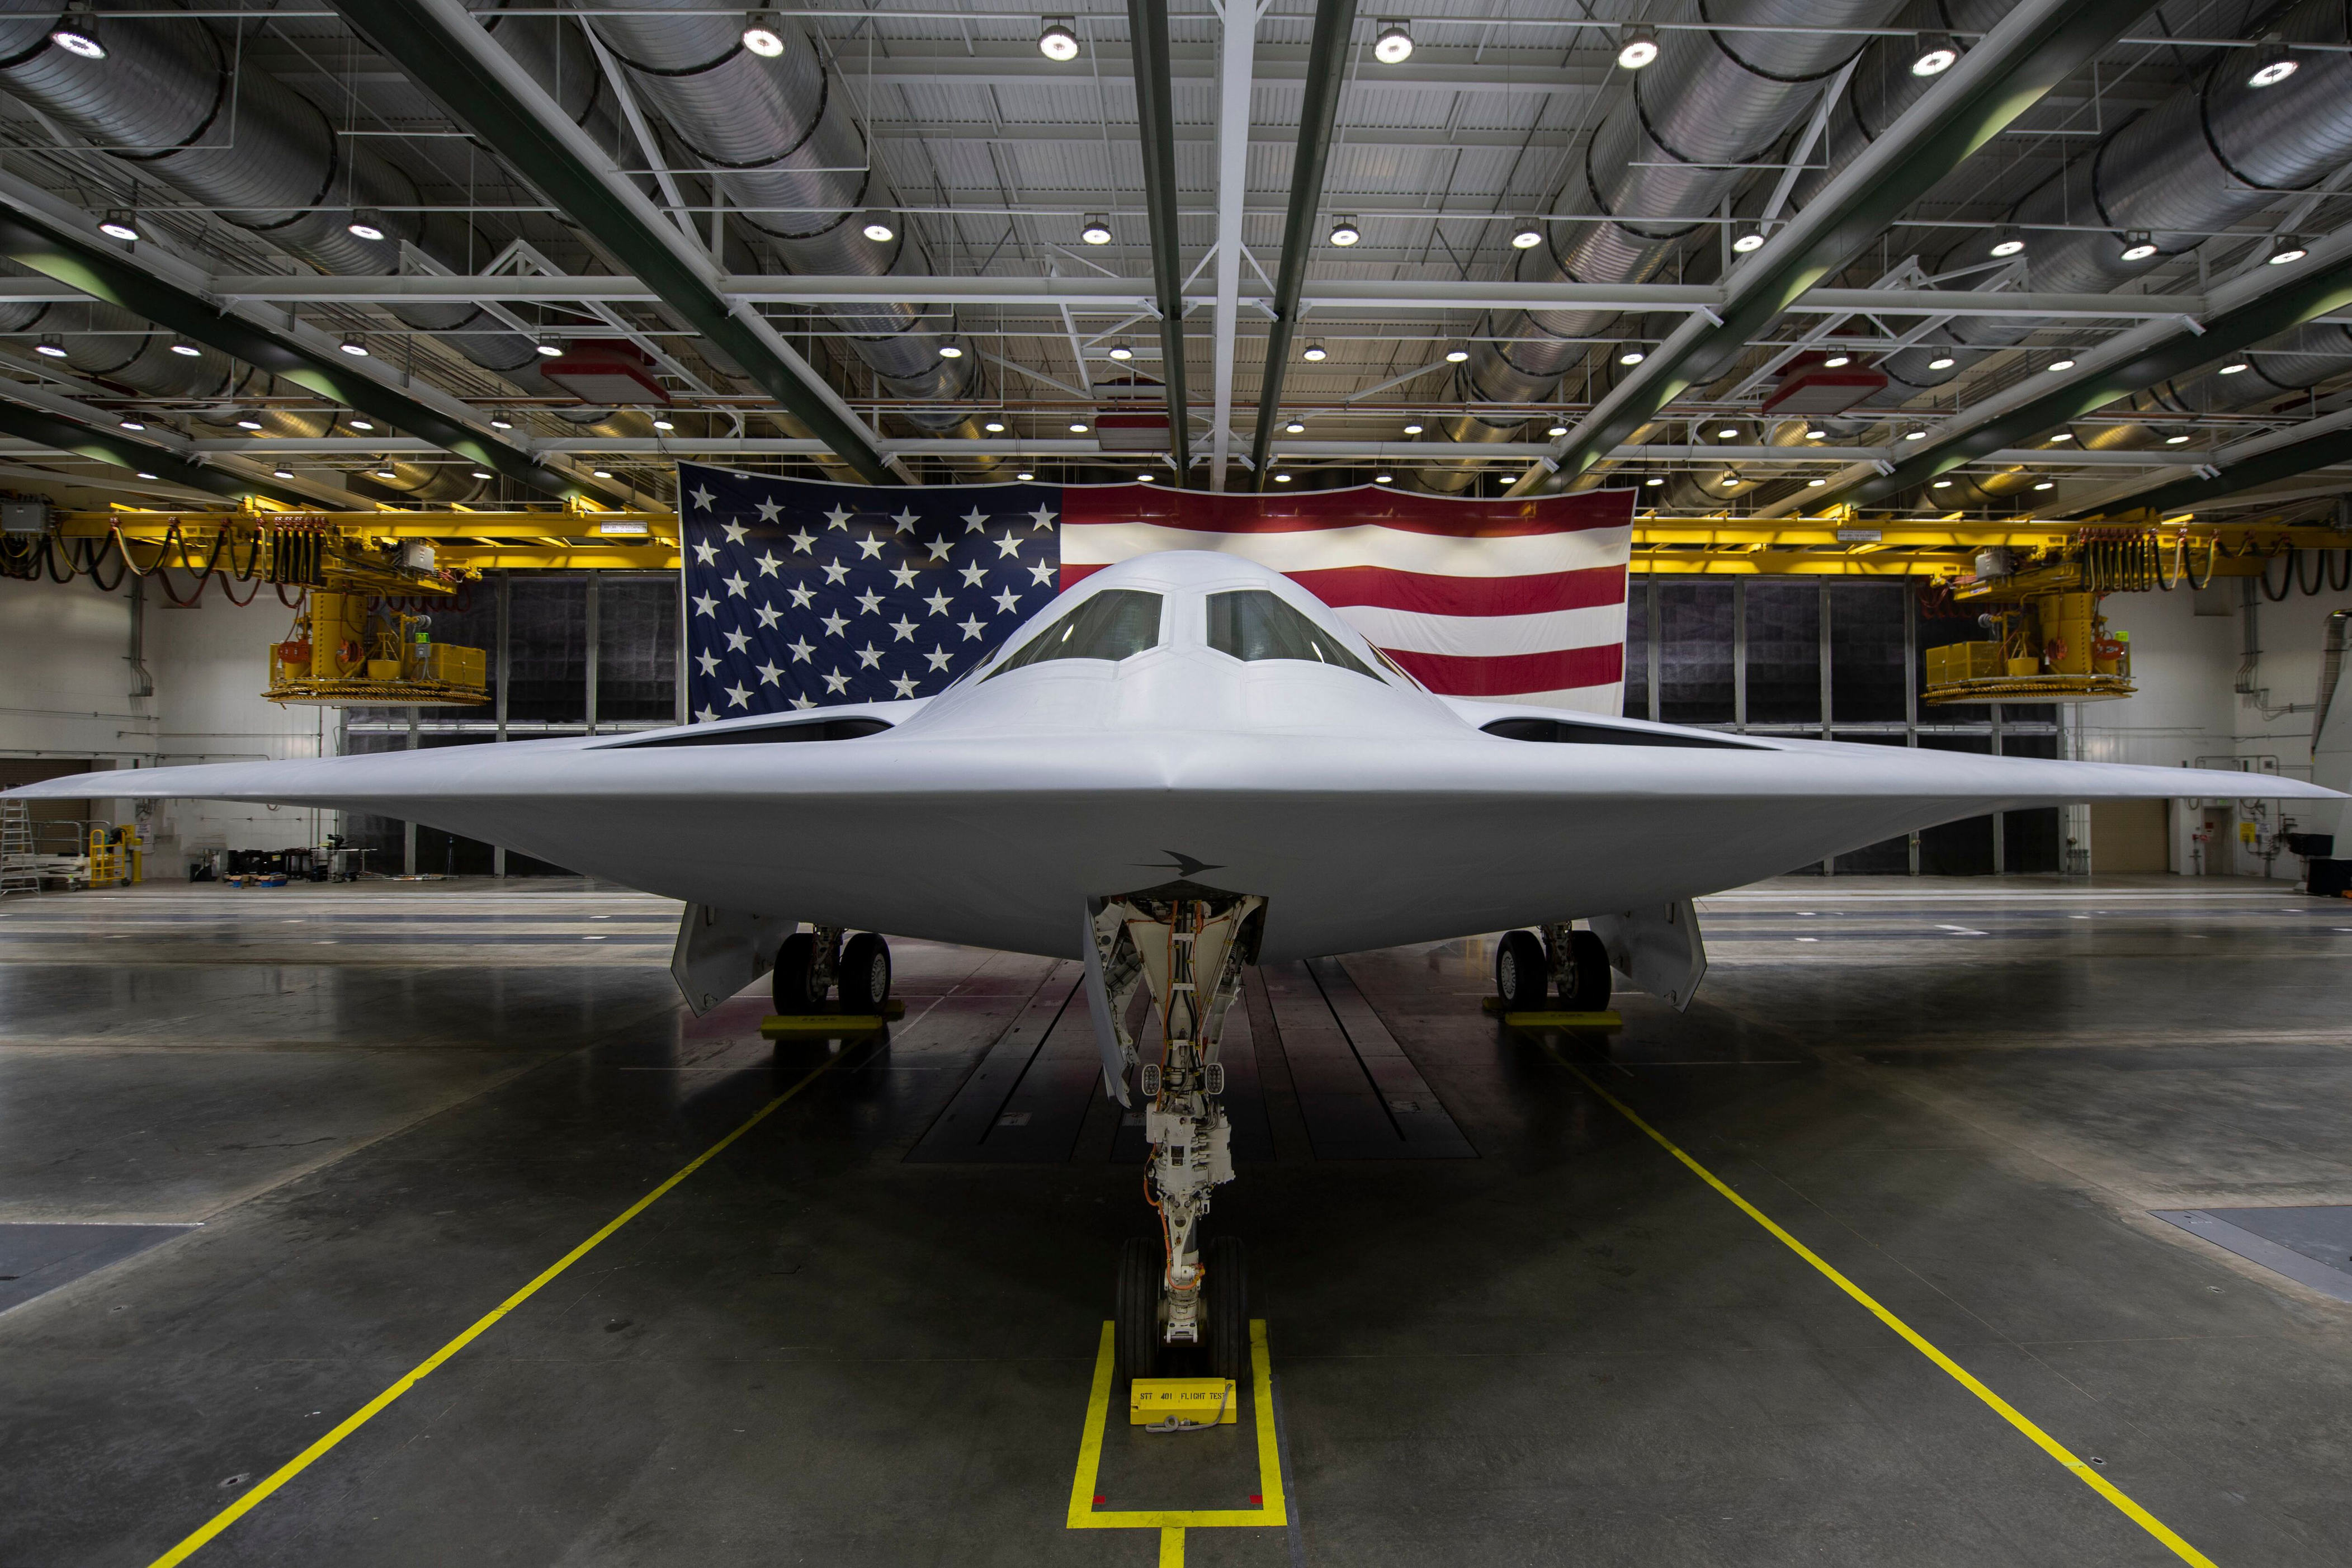 beyond drones: how defence experts imagine war in the 2040s